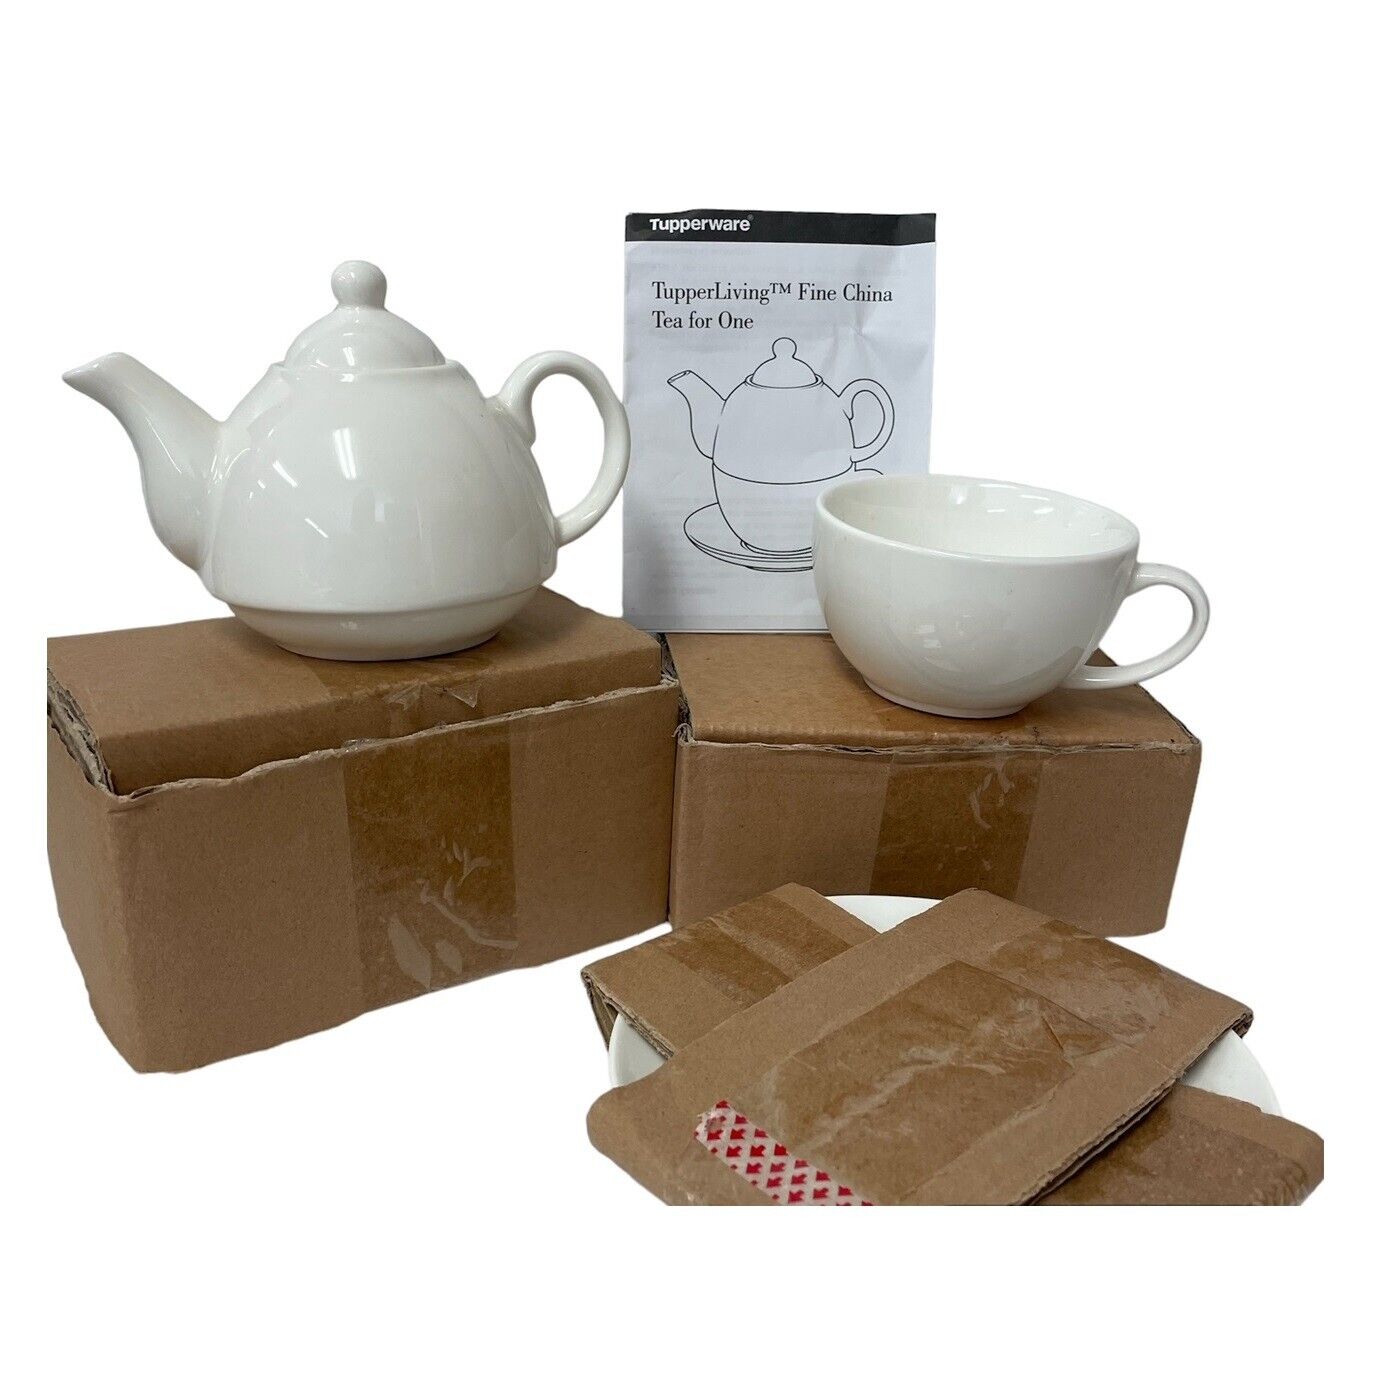 TupperLiving Fine China Tea for One Teapot Cup Saucer Set By Tupperware White